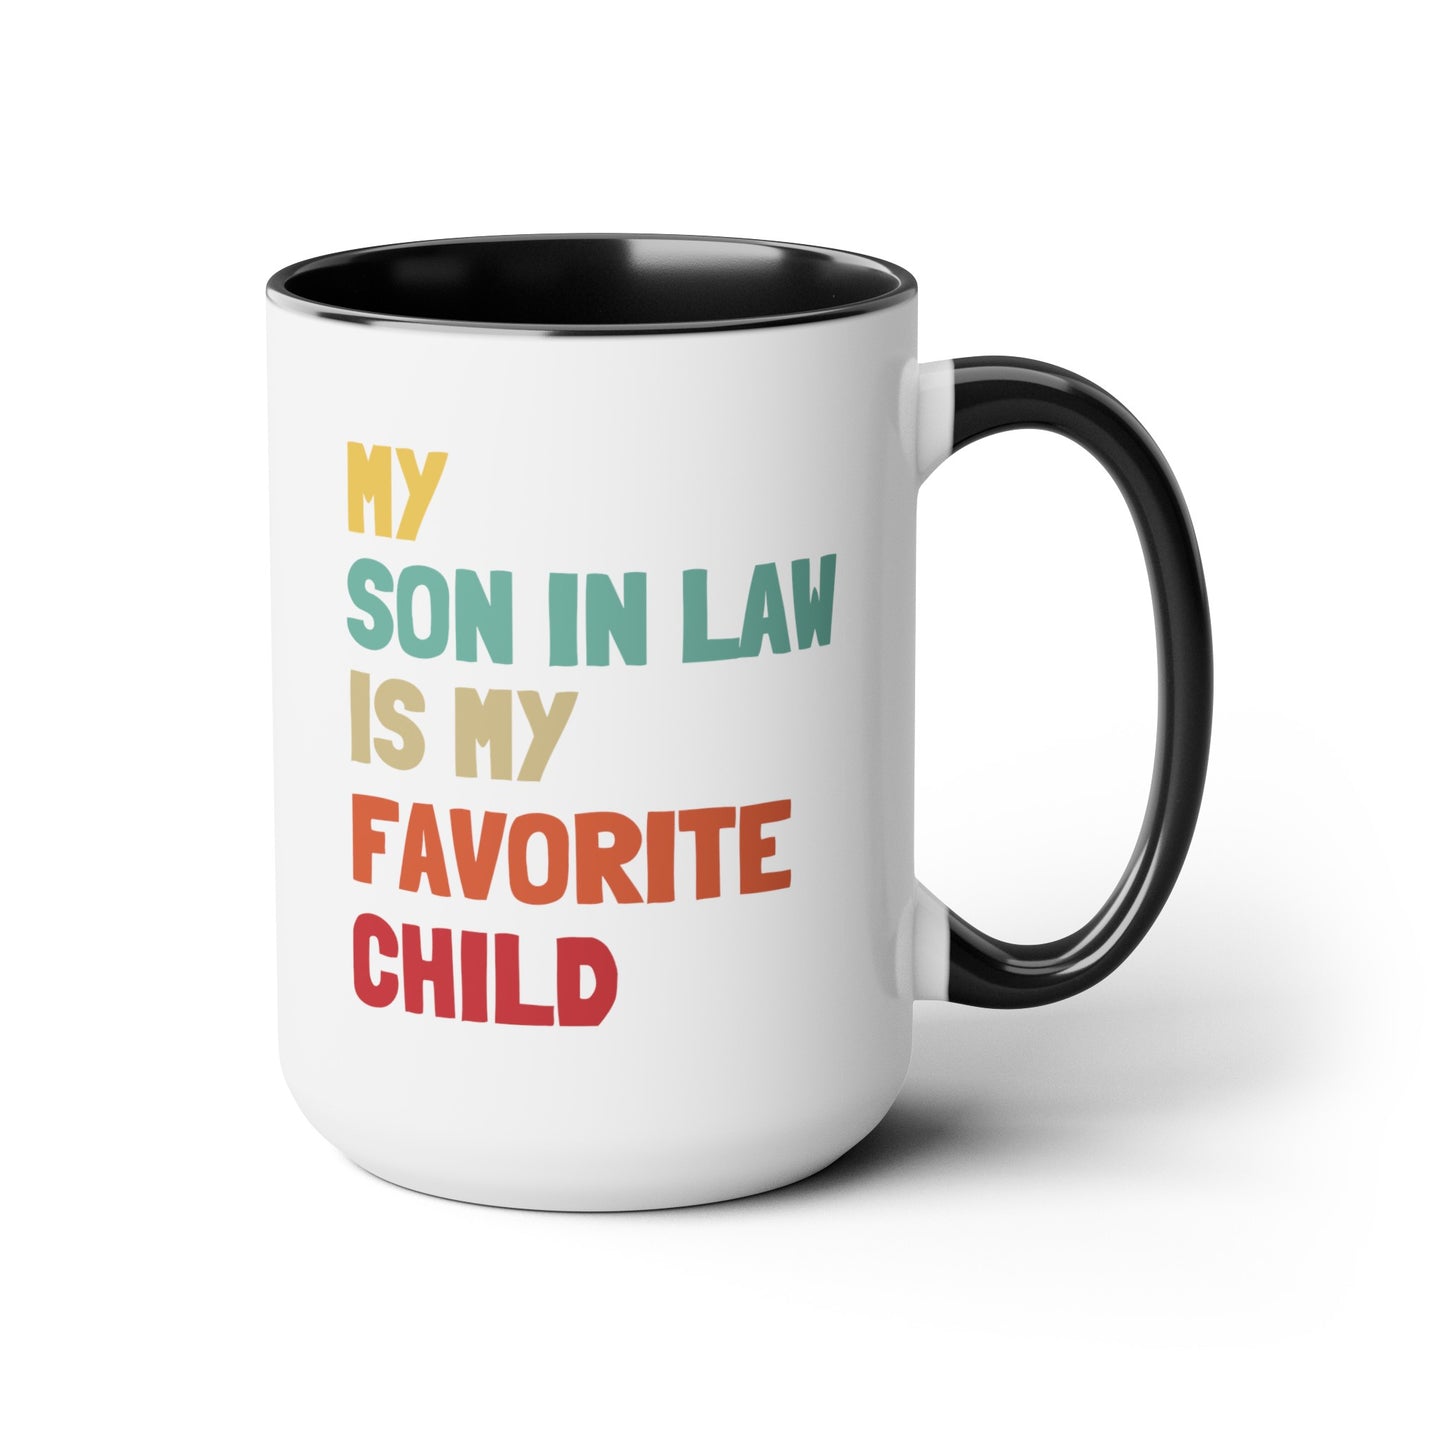 My Son In Law Is My Favorite Child 15oz white with black accent funny large coffee mug gift for mother's father's day waveywares wavey wares wavywares wavy wares